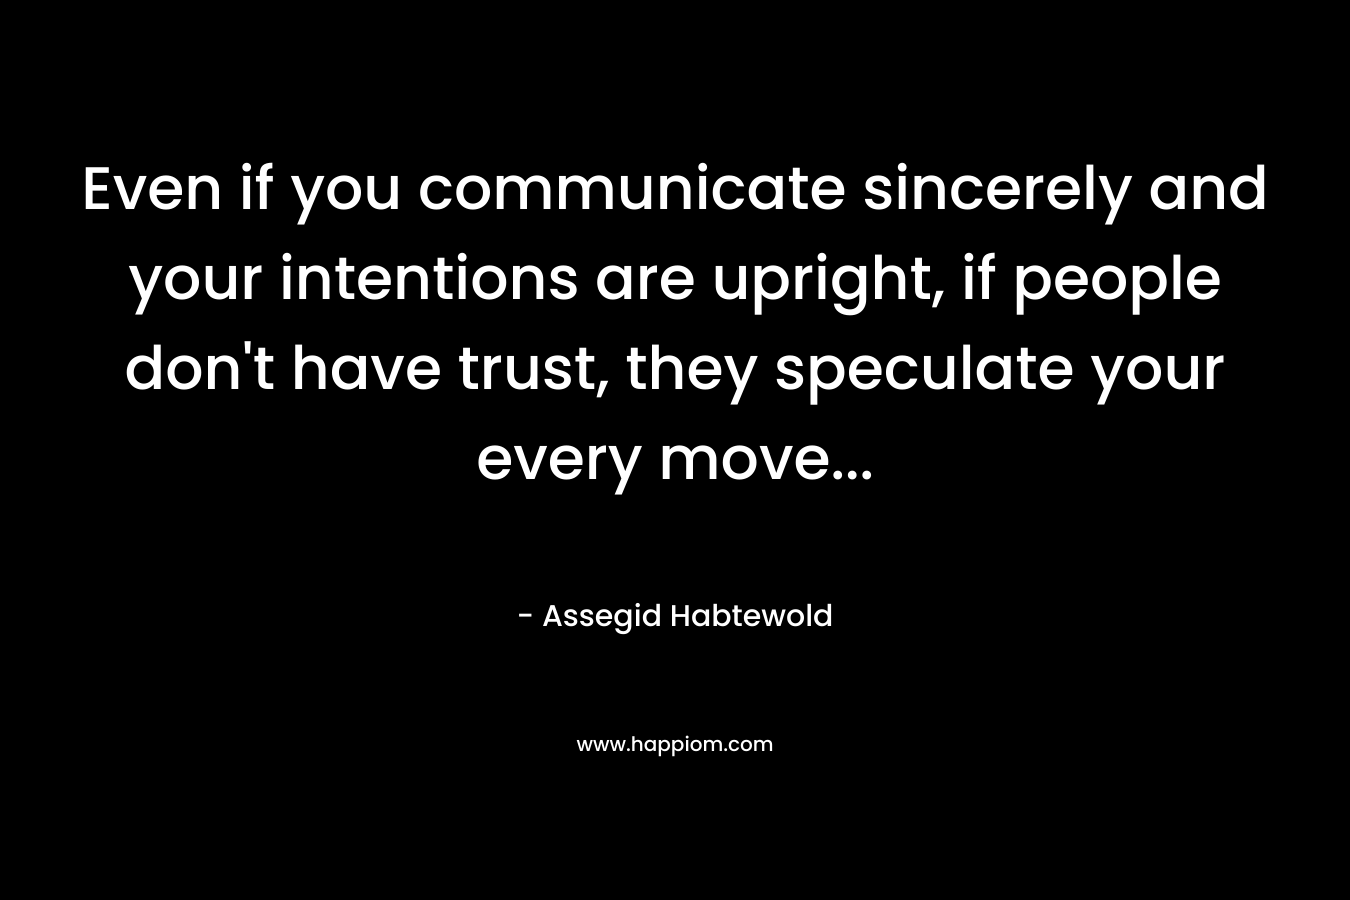 Even if you communicate sincerely and your intentions are upright, if people don't have trust, they speculate your every move...